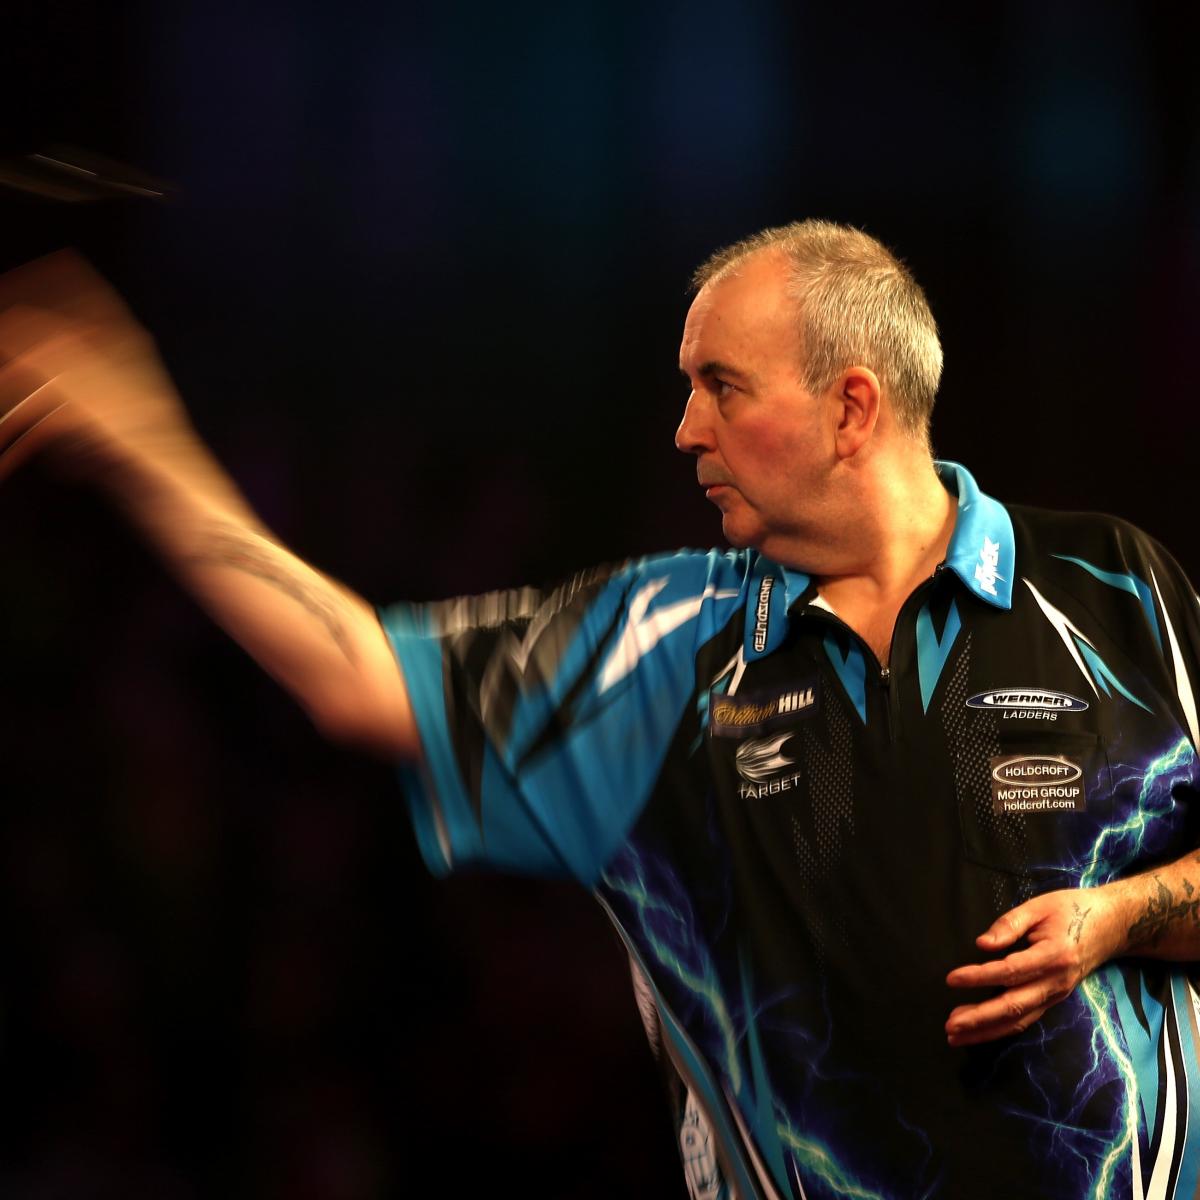 Pdc Masters Darts 2017 Scores Results Updated Schedule After Friday News Scores 